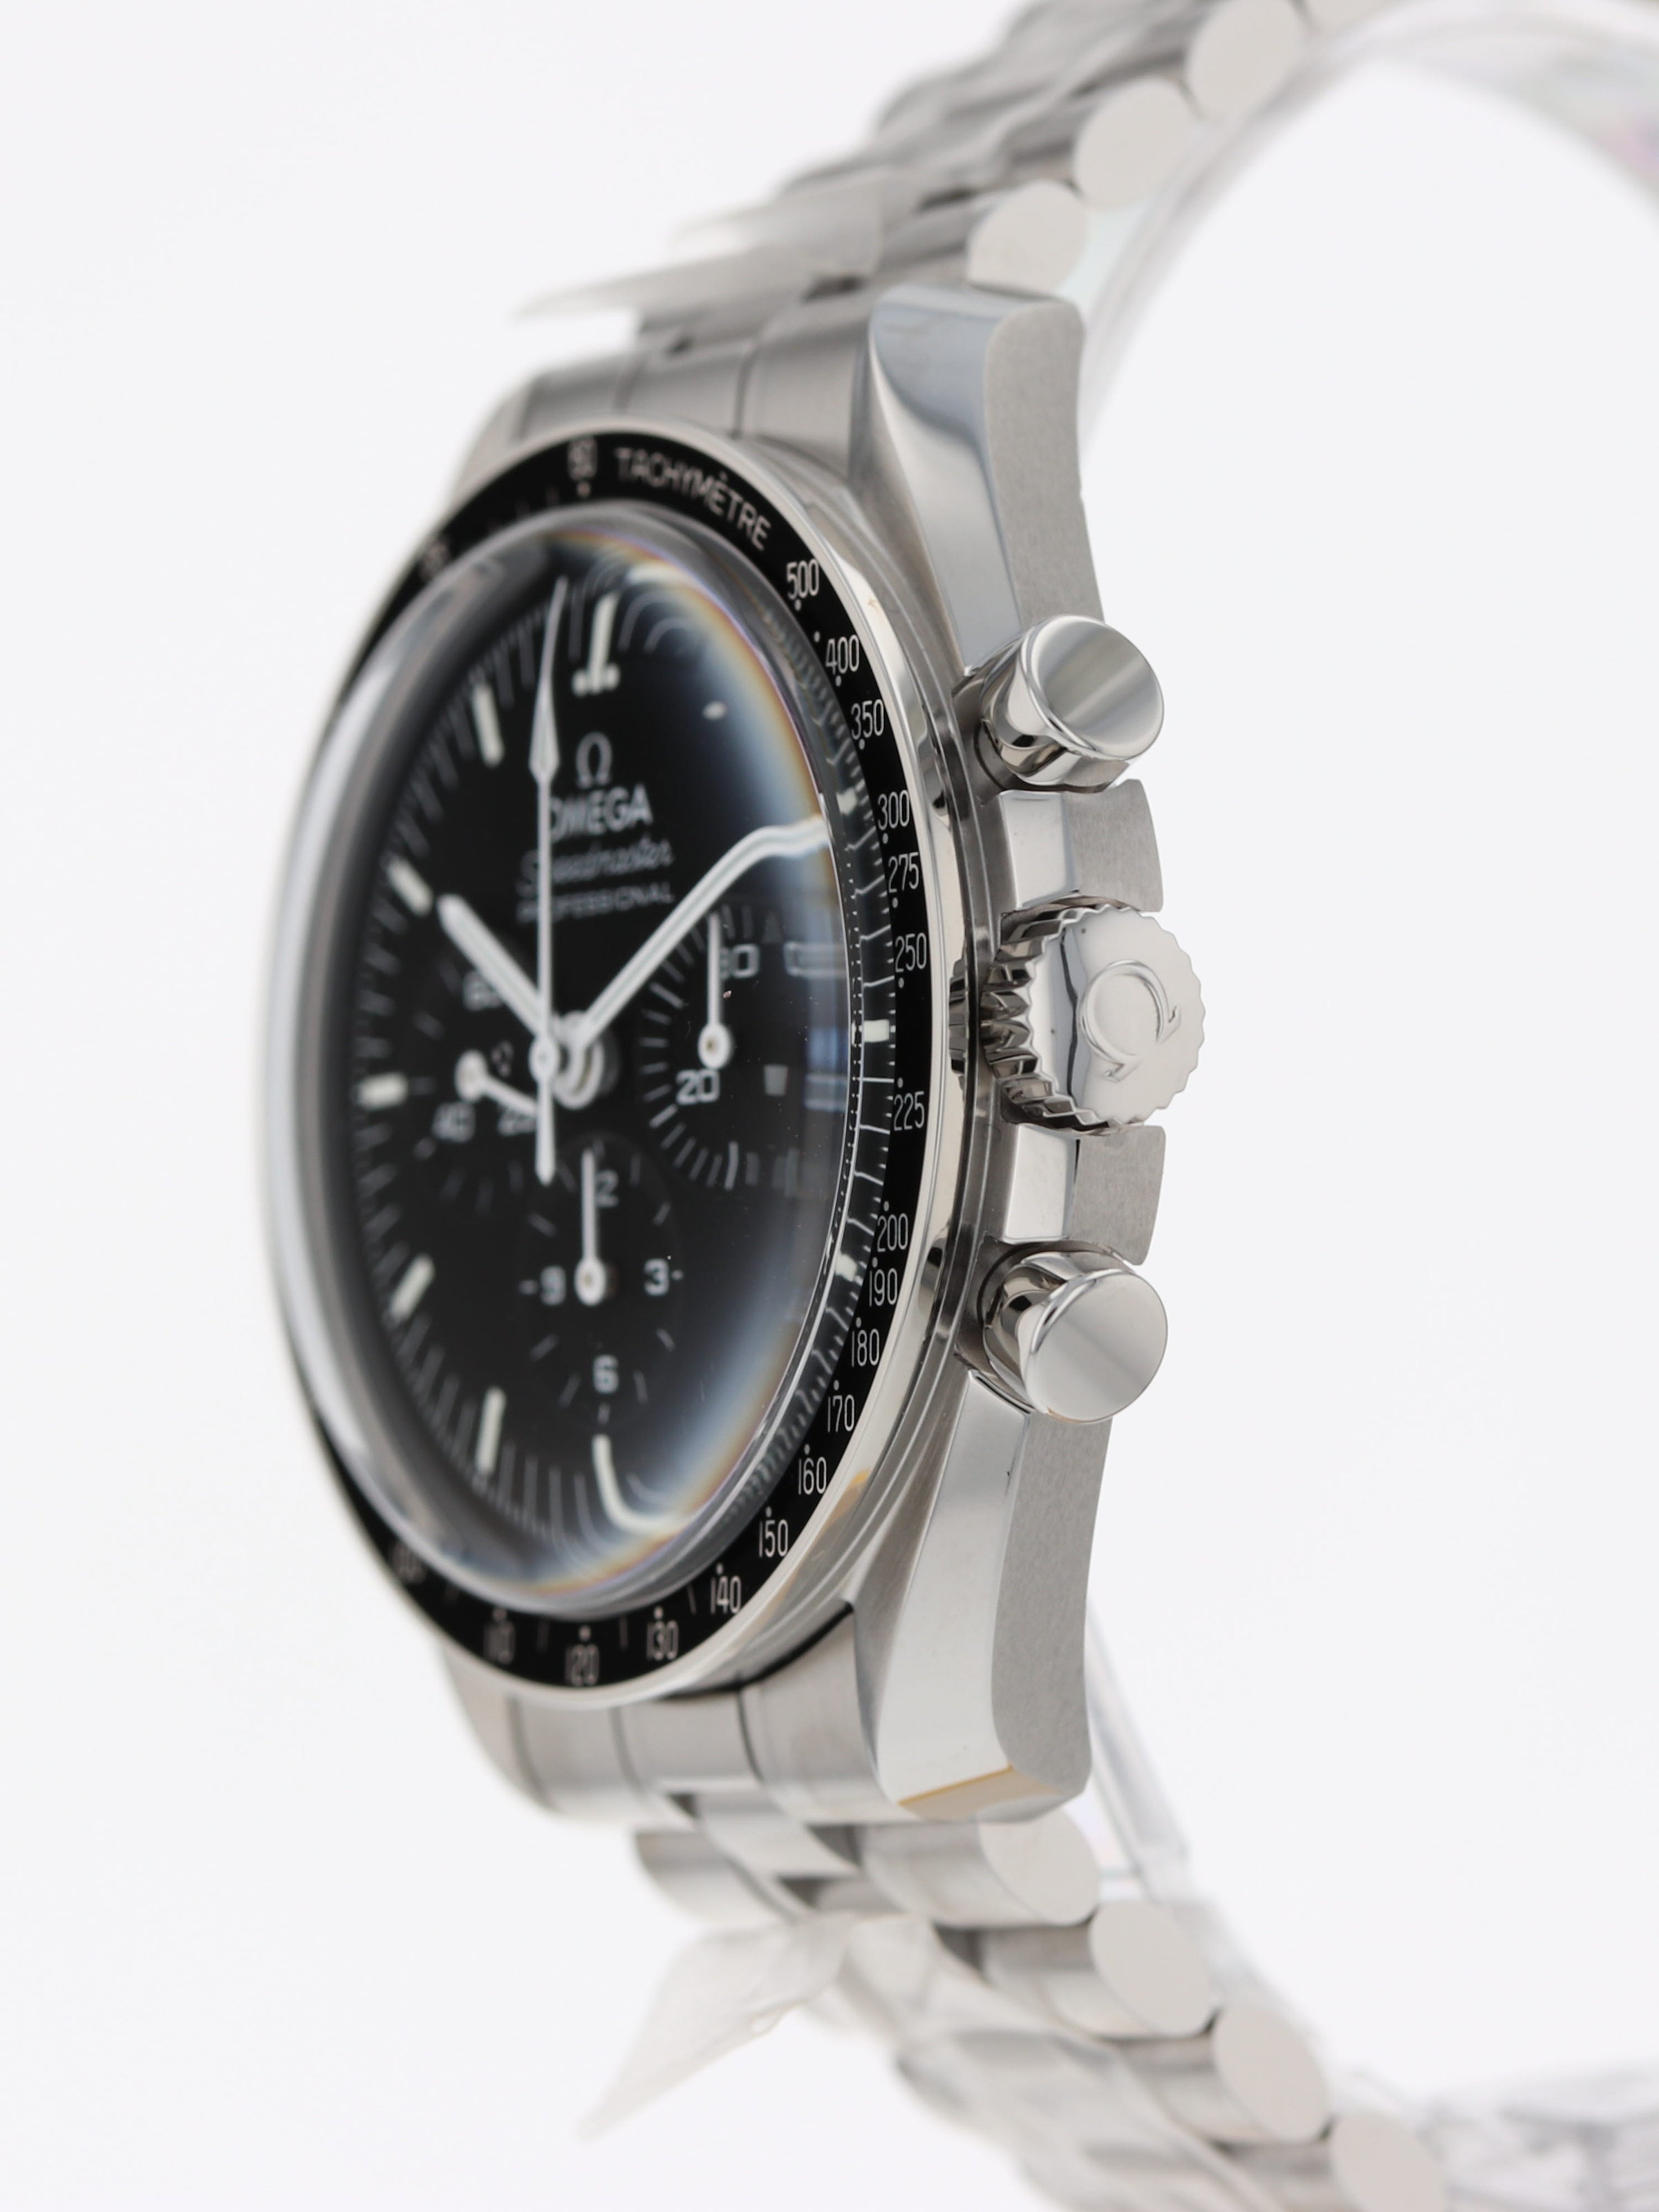 Omega Speedmaster Moonwatch 3861 310.30.42.50.01.002 - Smith and Bevill  Jewelers